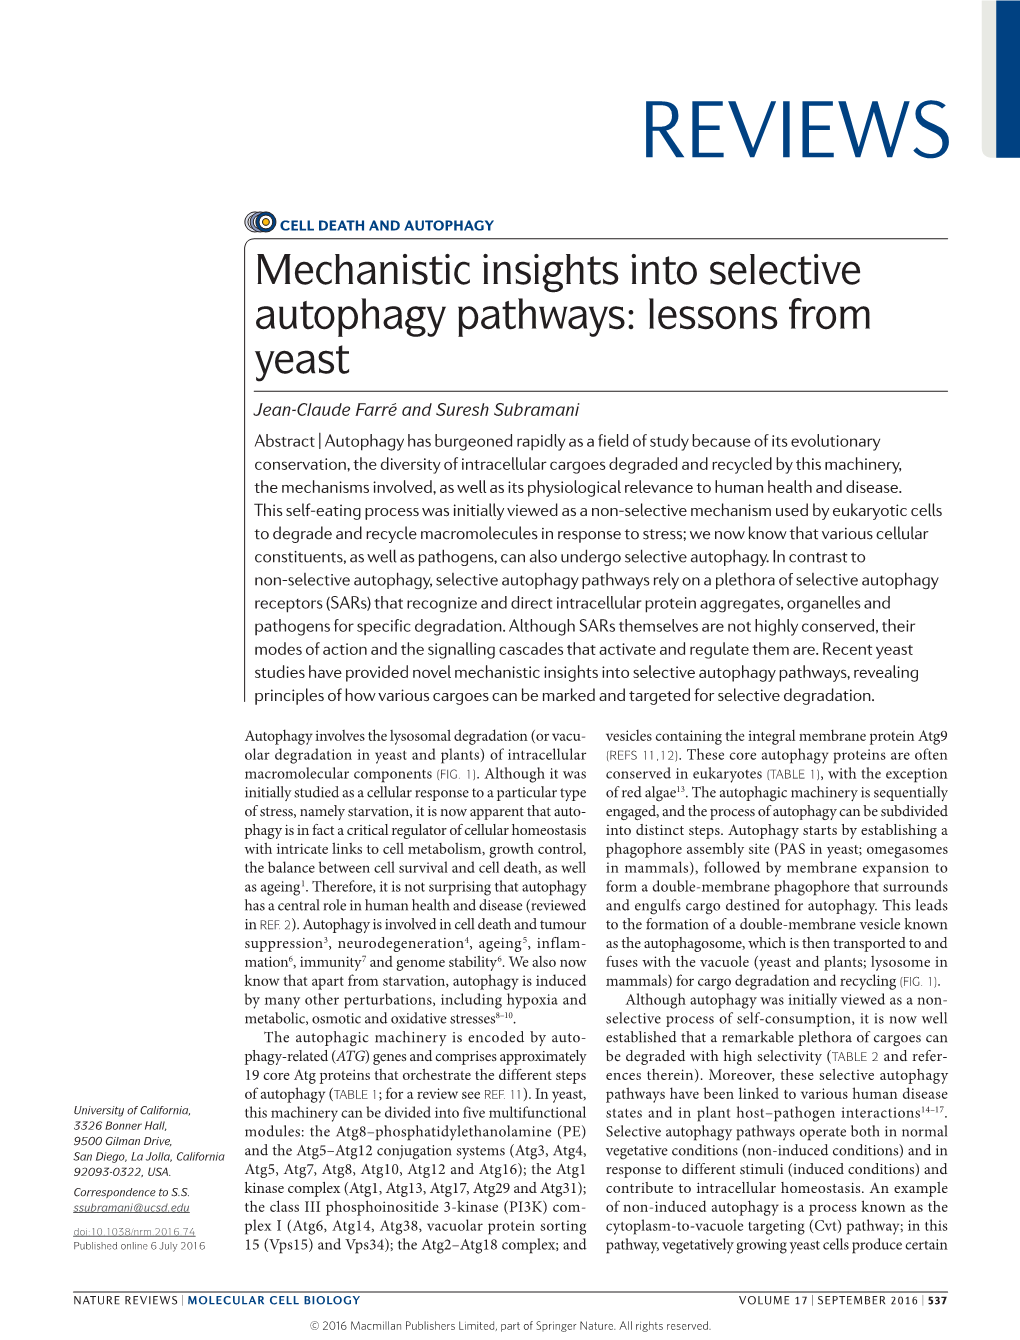 Mechanistic Insights Into Selective Autophagy Pathways: Lessons from Yeast